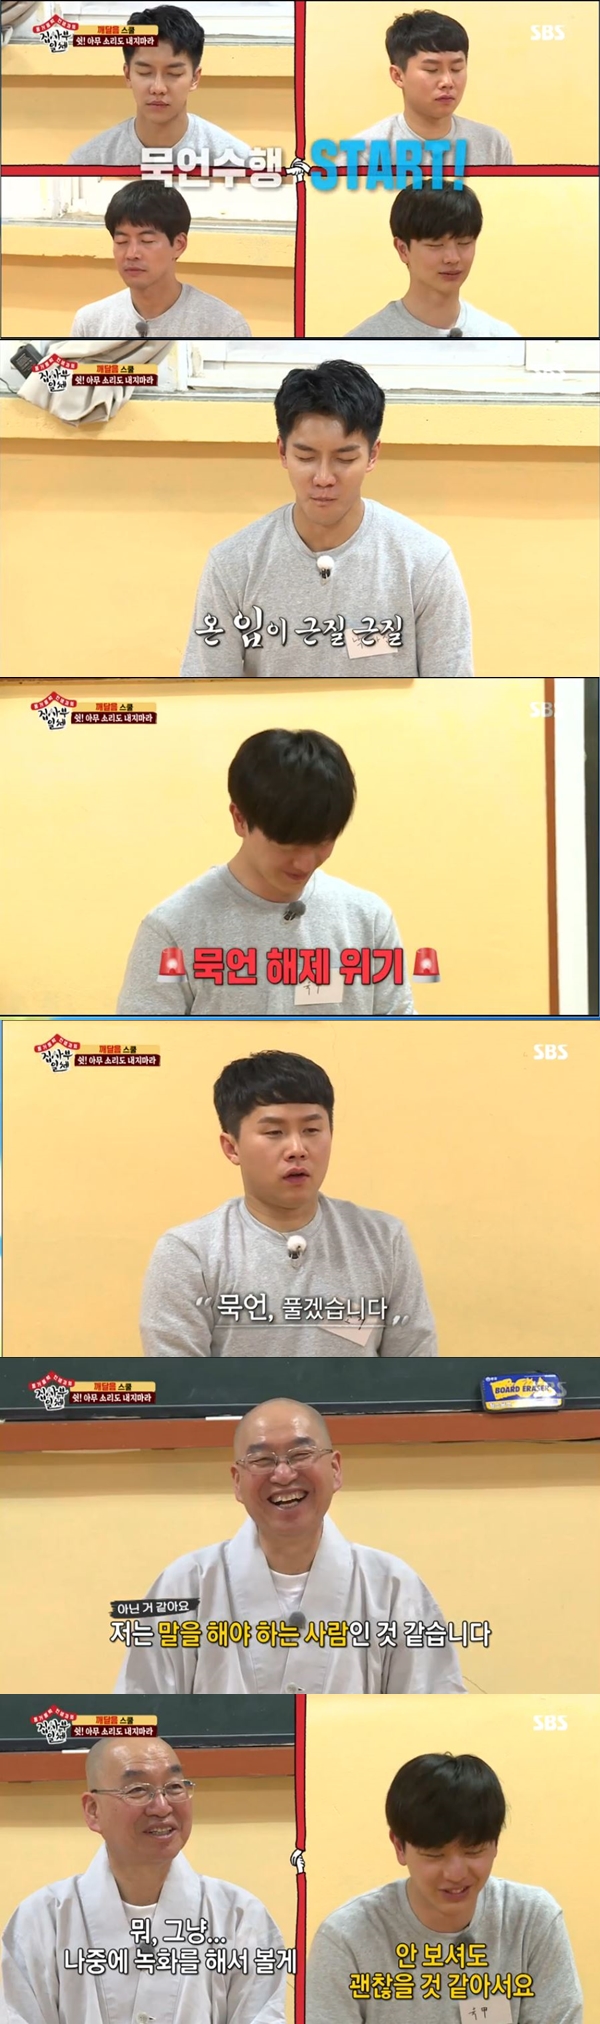 Lee Seung-gi realized his ego with Perform silence.On SBS All The Butlers broadcasted at 6:30 pm on the 20th, members who got enlightenment to Buddhist monk came out.All The Butlers members set their own legal name for use while in the temple.Buddhist Monk suggested to the members, Why do not you set your own legal name as a word for each others happiness?Yang Se-hyeong laughed, saying, I will do it to dry to control my anger. Lee Sang-yoon said, I feel peaceful when I see SONAMOO.Thats why Ill do it as SONAMOO. Yook Sungjae said, I like anything that starts with the meat. Yang Se-hyeong said, How about the meat pack? Yook Sungjae was set as six packs.The members were happy to refine their herbs for dinner. As long as they stayed in the temple, they refined various herbs and talked to each other.The Buddhist monk proposed to the members to write honorifics to each other and the members kept it.Lee Seung-gi told Yang Se-hyeong, Dryer, please take this one, which provoked his anger.The members laughed and made side dishes with herbs and set up dinner tables.At dinner, the members ate a meal that forgot the meat. Lee Seung-gi ate miso stew and said, Did not you go in here?Buddhist monk would be a mushroom, surprising Lee Seung-giYang Se-hyeong was satisfied, saying, If you eat such a vegetarian food, you can eat it every day.Buddhist monk enigmatically enigmatic to members as they dined; Buddhist monk had the question of how many hard work did you go for this lettuce?The members were worried, but Lee Seung-gi laughed, saying that it would be 78,000 people.In the jokes of the members, Buddhist Monk said, You should not just think about picking vegetables. If you think about the people who made the truck, there are so many peoples hard work.Yang Se-hyeong was enlightened, saying, Where would anyone think that?Lee Seung-gi said, I should not think that I just paid it, and I just can be a part of me.All of my work was made with the hard work of everyone, Buddhist monk summed up in a word.After dinner, the members had time for self-reflection; Yang Se-hyeong asked, What exactly is self-reflection?Self-reflection is about looking back at yourself, Buddhist Monk replied, with Lee Seung-gi worried, saying: So are you doing Perform silence?Lee Seung-gi had said last week that Lee Sang-yoons proposal to try Perform Silence was the hardest thing in my life.Lee Seung-gi asked if he could cancel the enrollment and laughed; Yang Se-hyeong worried, One hour is like 10 days for us.Shortly after starting the Performance Silence, the members failed; within ten minutes of starting, Yang Se-hyeong opened his eyes and interrupted the members.The members all tried to endure a painful hour of laughing, but Yang Se-hyeong sighed or called out names, interrupting the performance of the members.In the end, within 30 minutes of starting the Perform Silence, all the members opened their eyes.Buddhist Monk, who returned an hour later, praised the members without knowing anything.Everyone has a talent, Buddhist Monk said, notifying him that Perform Silence is over.Yang Se-hyeong said, This silence is very good.Lee Seung-gi said, I think I know what I am because I speak again.Yook Sungjae said, I hope you do not watch the broadcast. He tried to hide their performance silence.To avoid sleeping with the master who took 108 times, the members made a game. Lee Seung-gi worried that I want to sleep with my master, but it seems to be 108 times harder.Yang Se-hyeong suggested, Lets do a game where a person who holds on with cold water warms up.Lee Seung-gi said, I am confident that I have done a real cold water friction. Yang Se-hyeong sat him down saying, You are the first.But unlike his confidence, Lee Seung-gi gave a cold-watered, boisterous laugh, saying he was not so cold until the end.